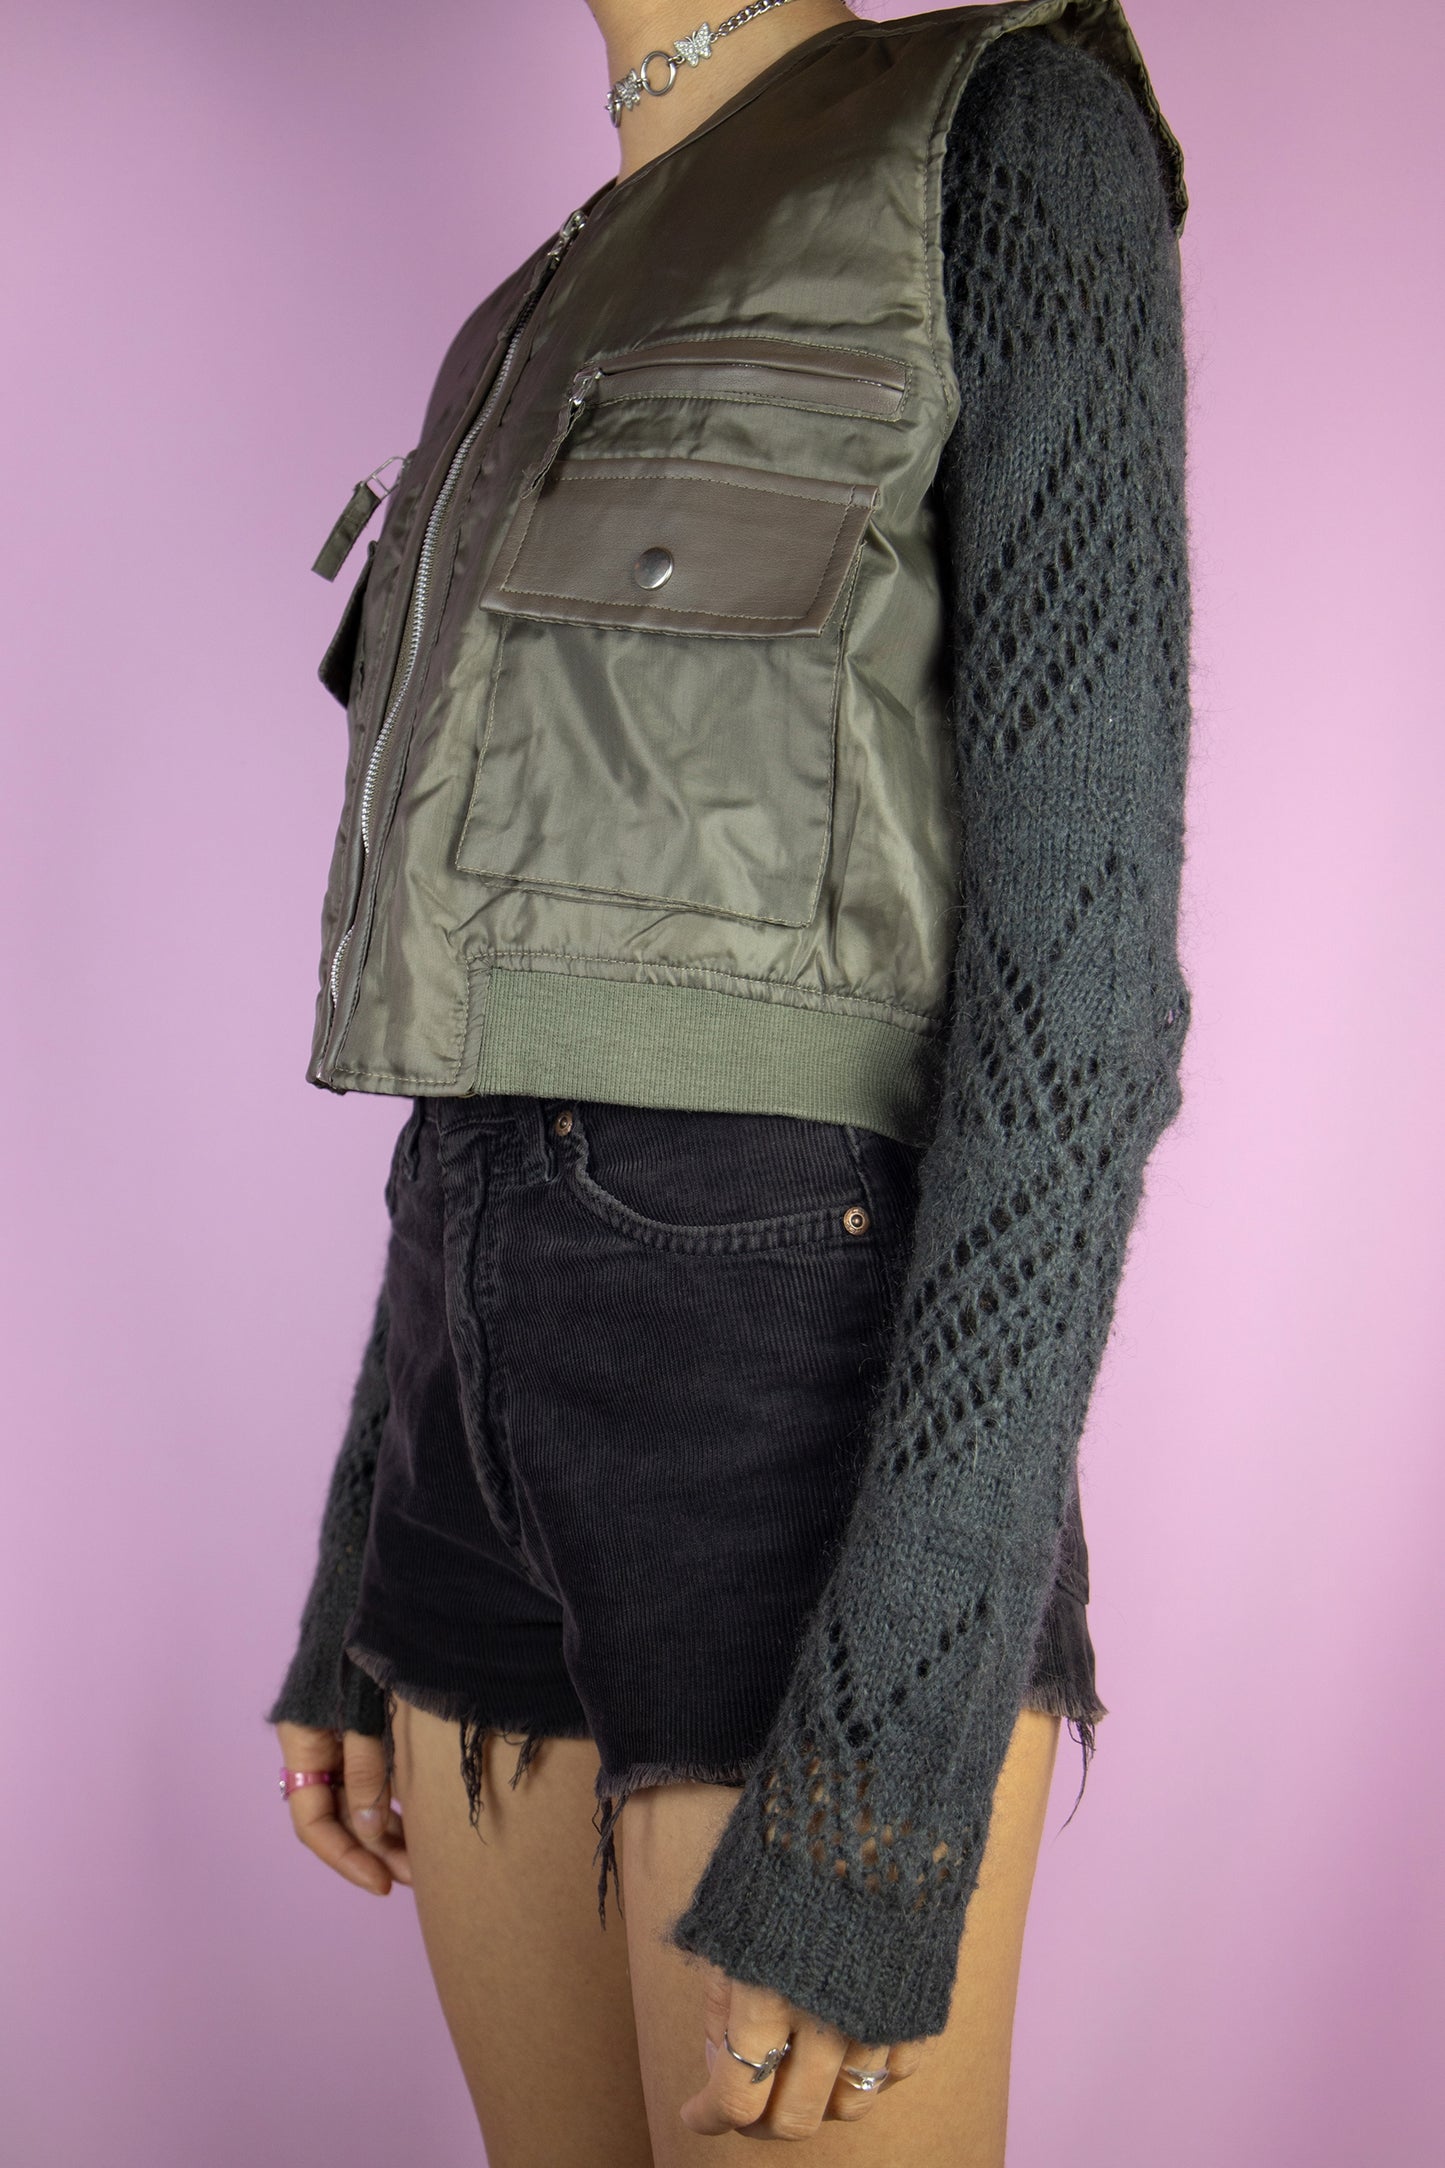 The Vintage 90s Utility Cargo Vest Jacket is a khaki green vest with pockets and a zipper closure. Cyber goth grunge 1990s techwear tactical jacket.